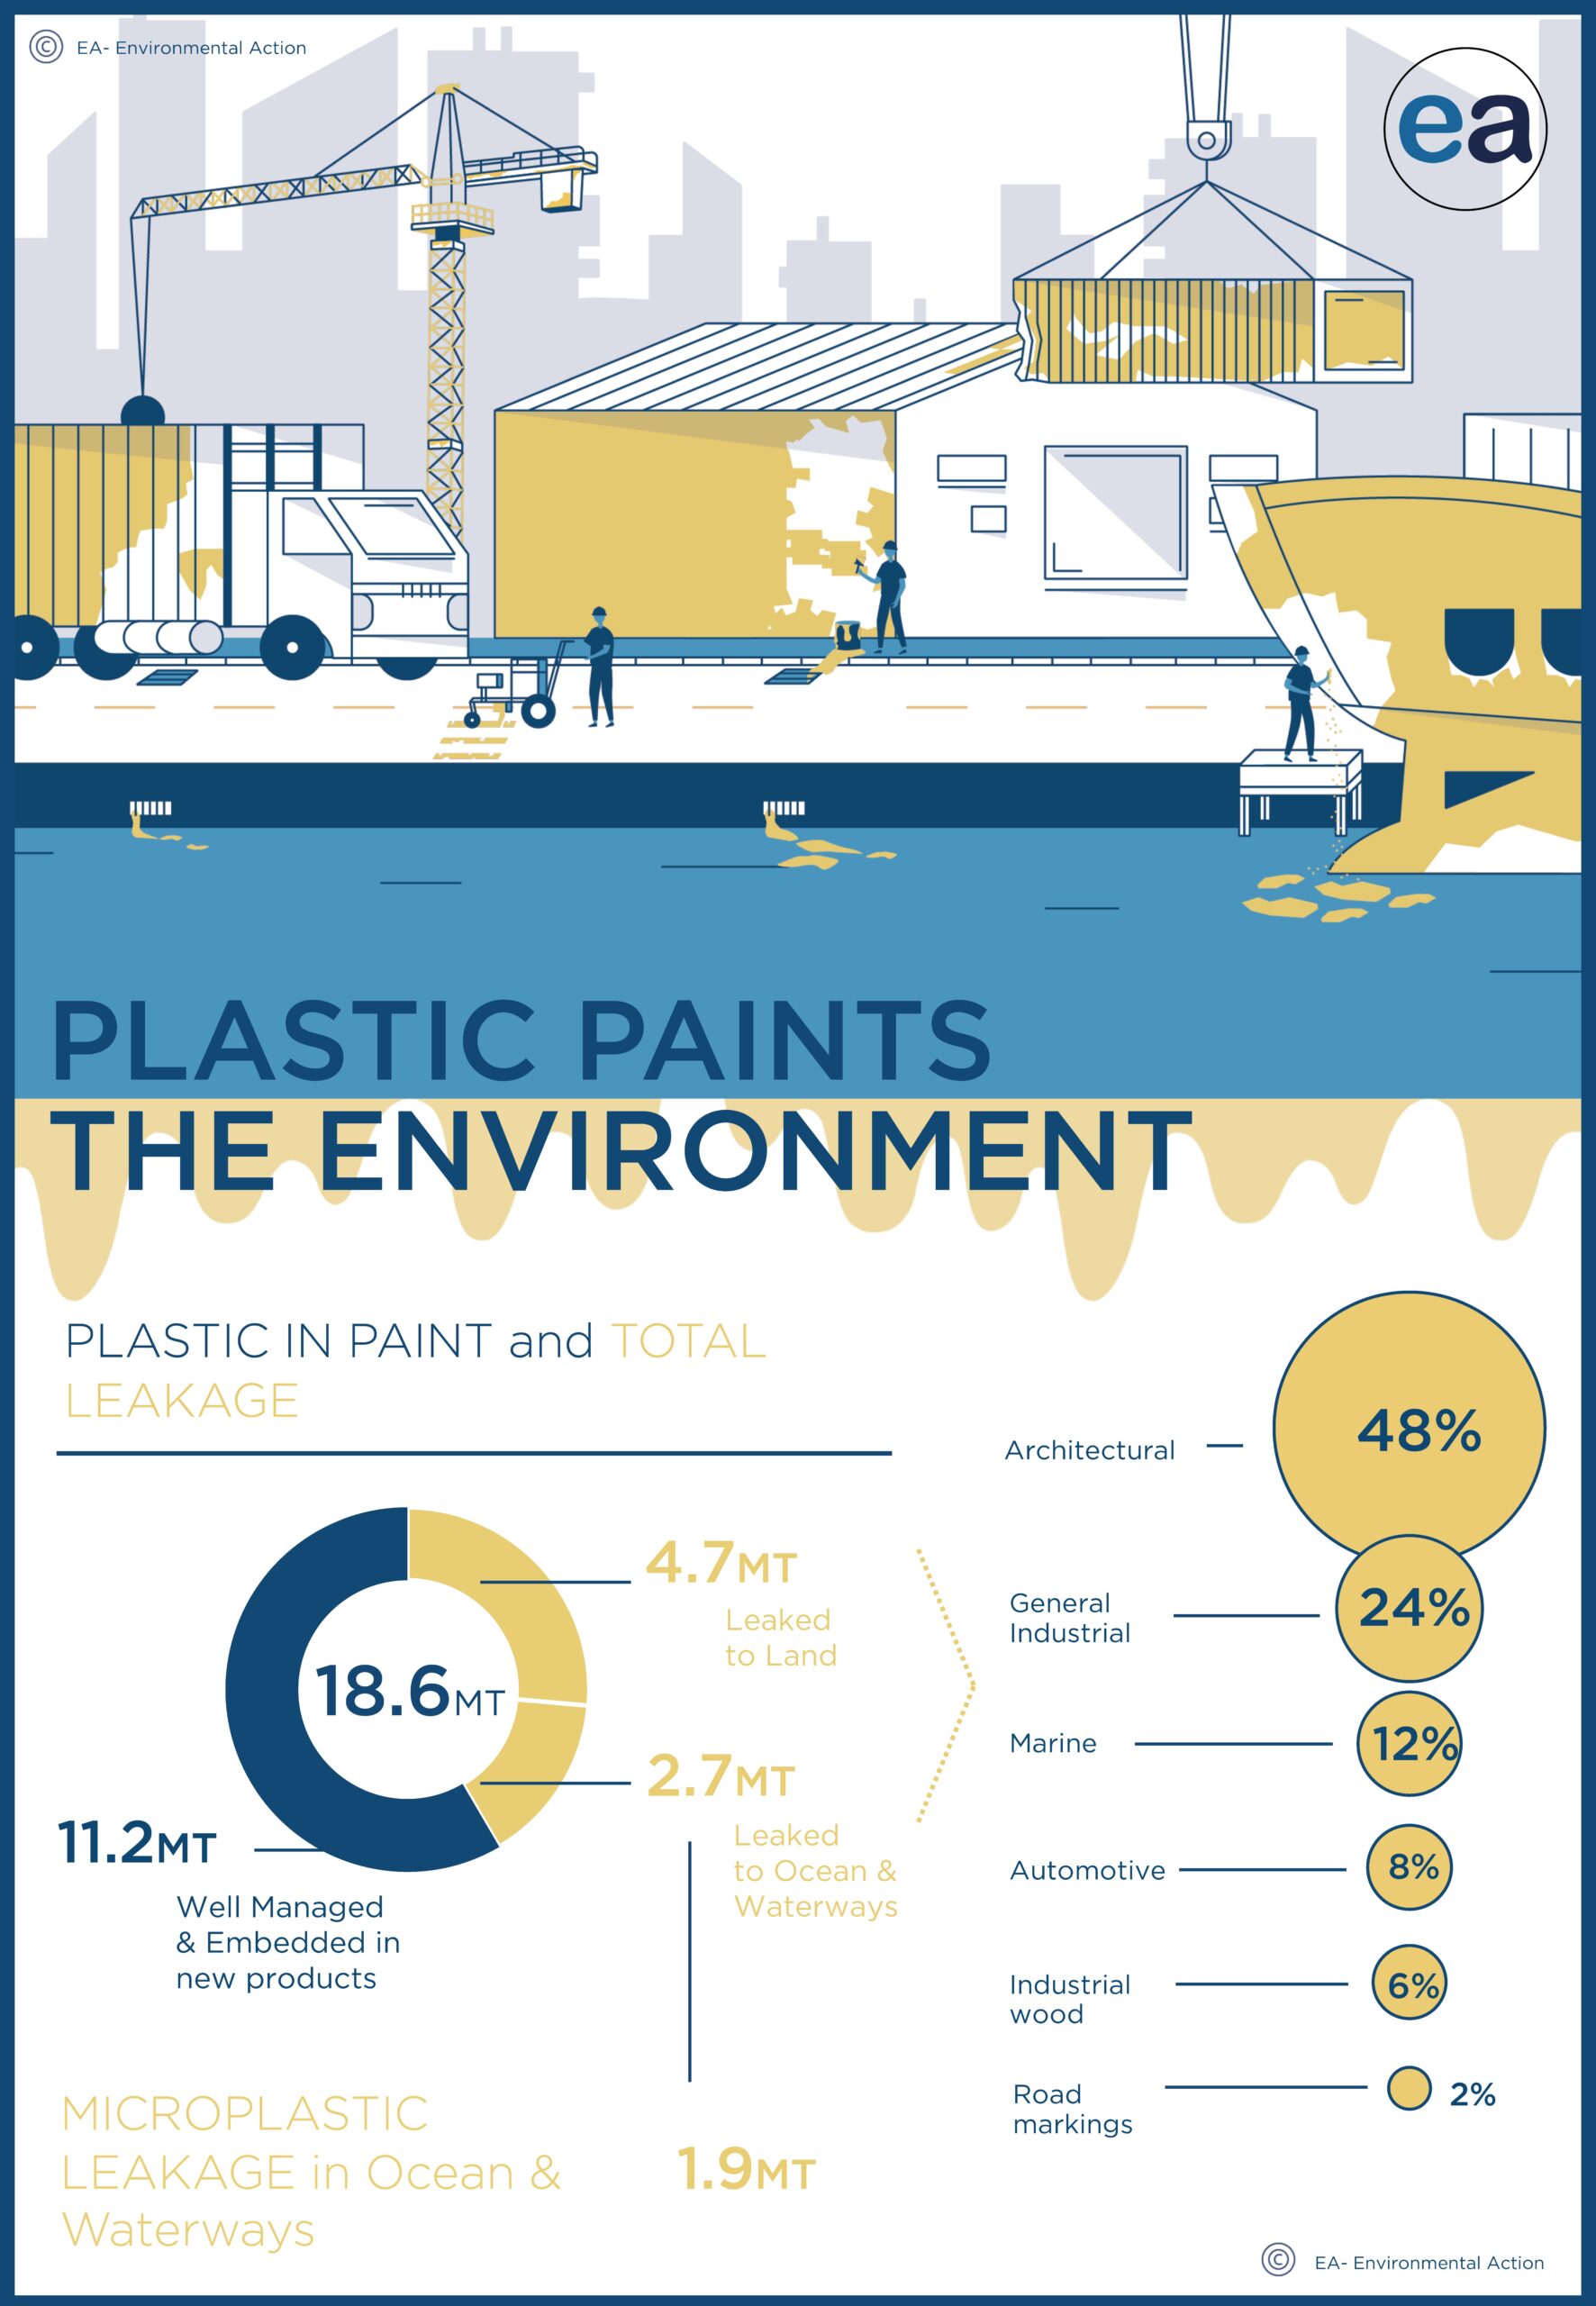 Illustration "Plastic Paints in the Environment"